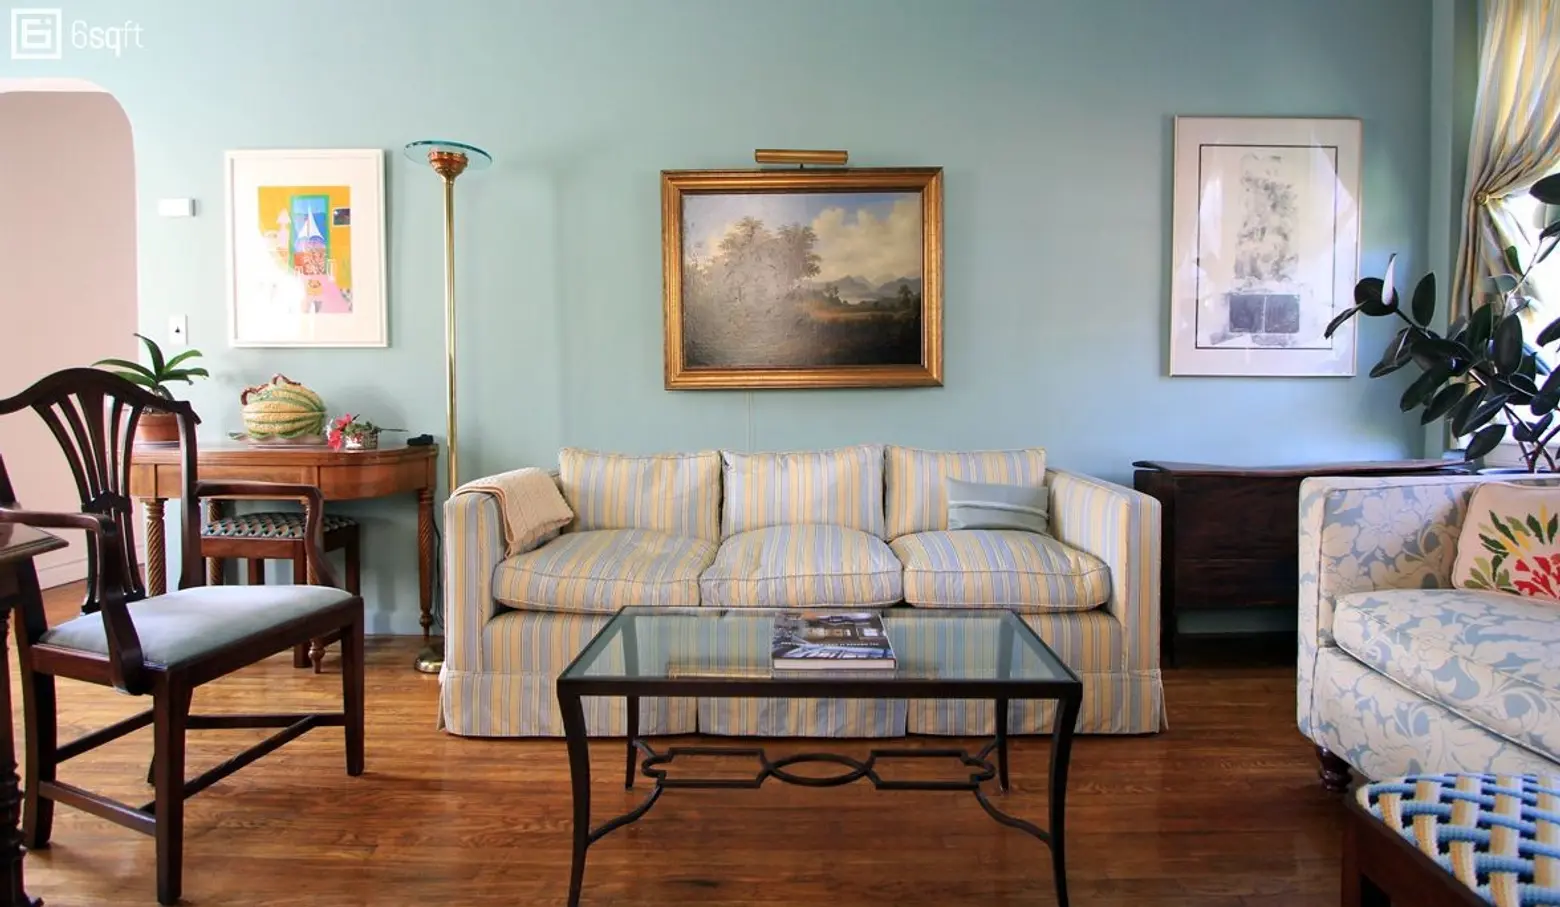 Classic Greenwich Village apartment, homes of interior designers, NYC apartment tours